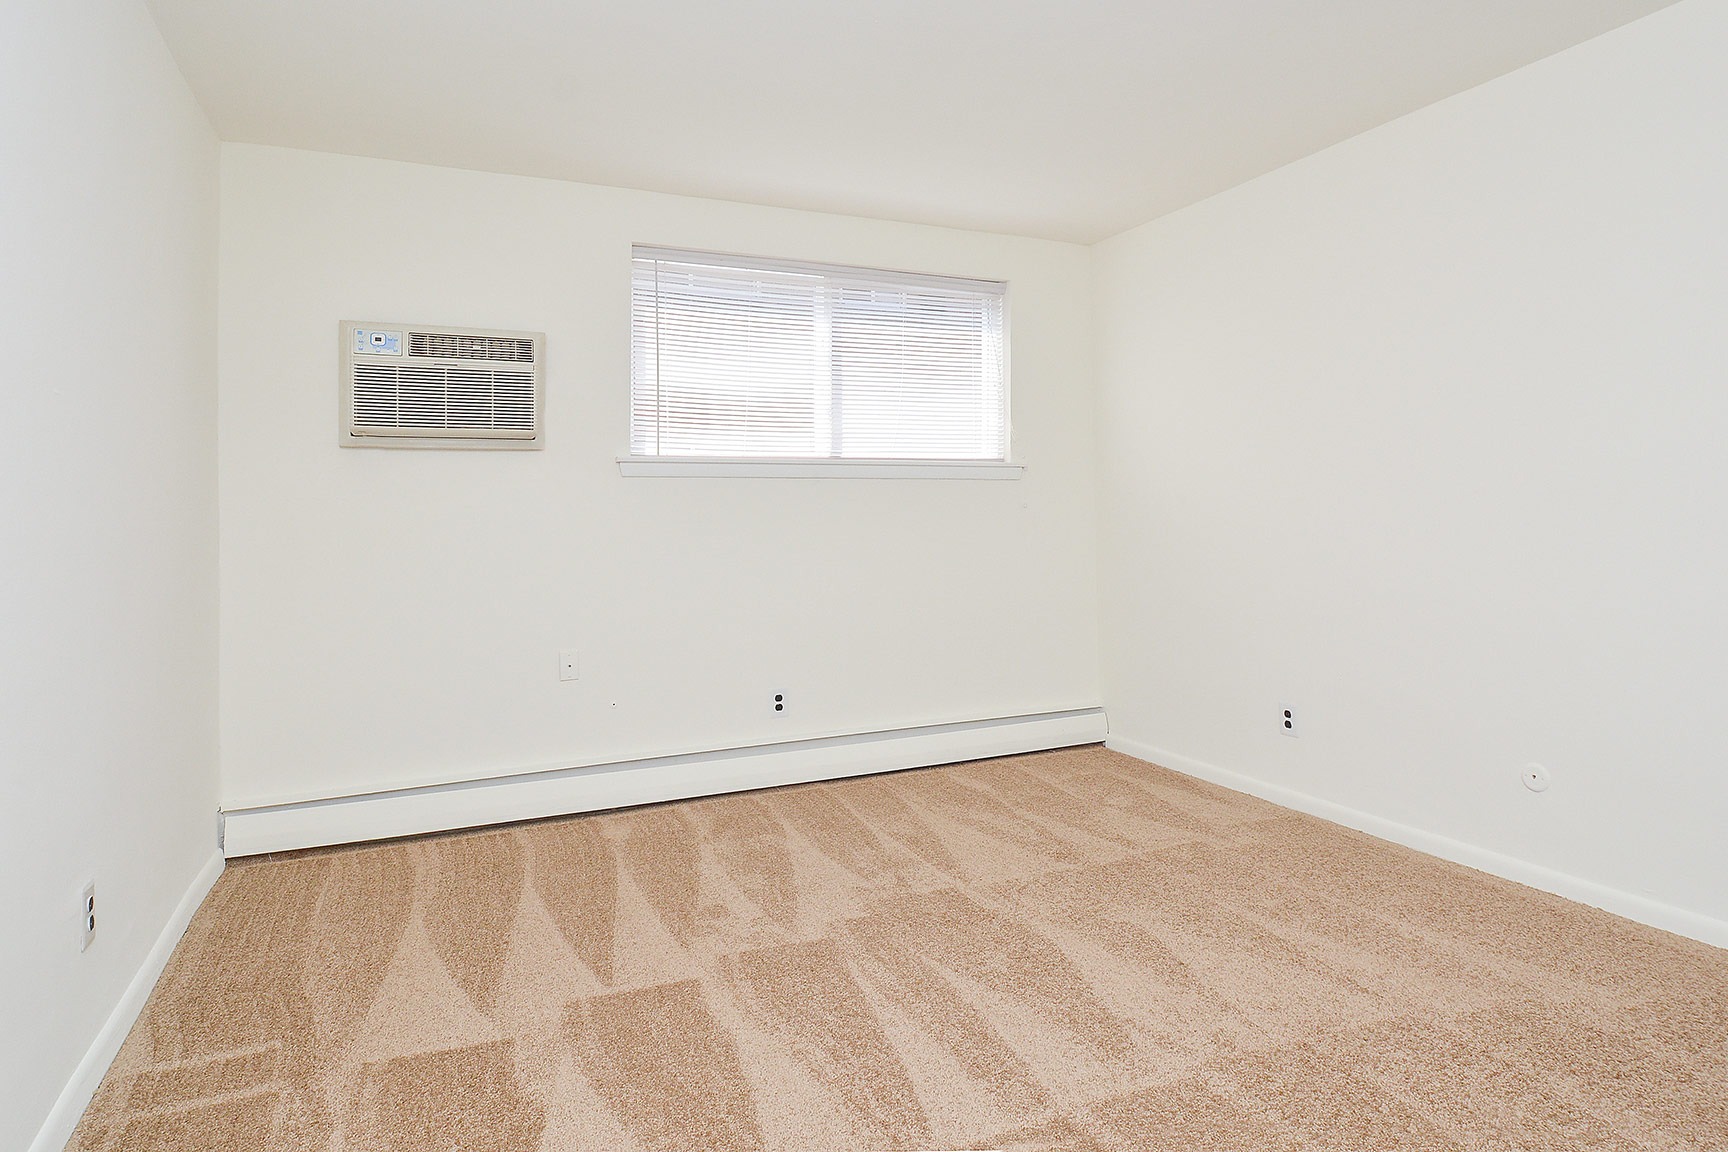 Woodview Apartments living room with in-wall air conditioner